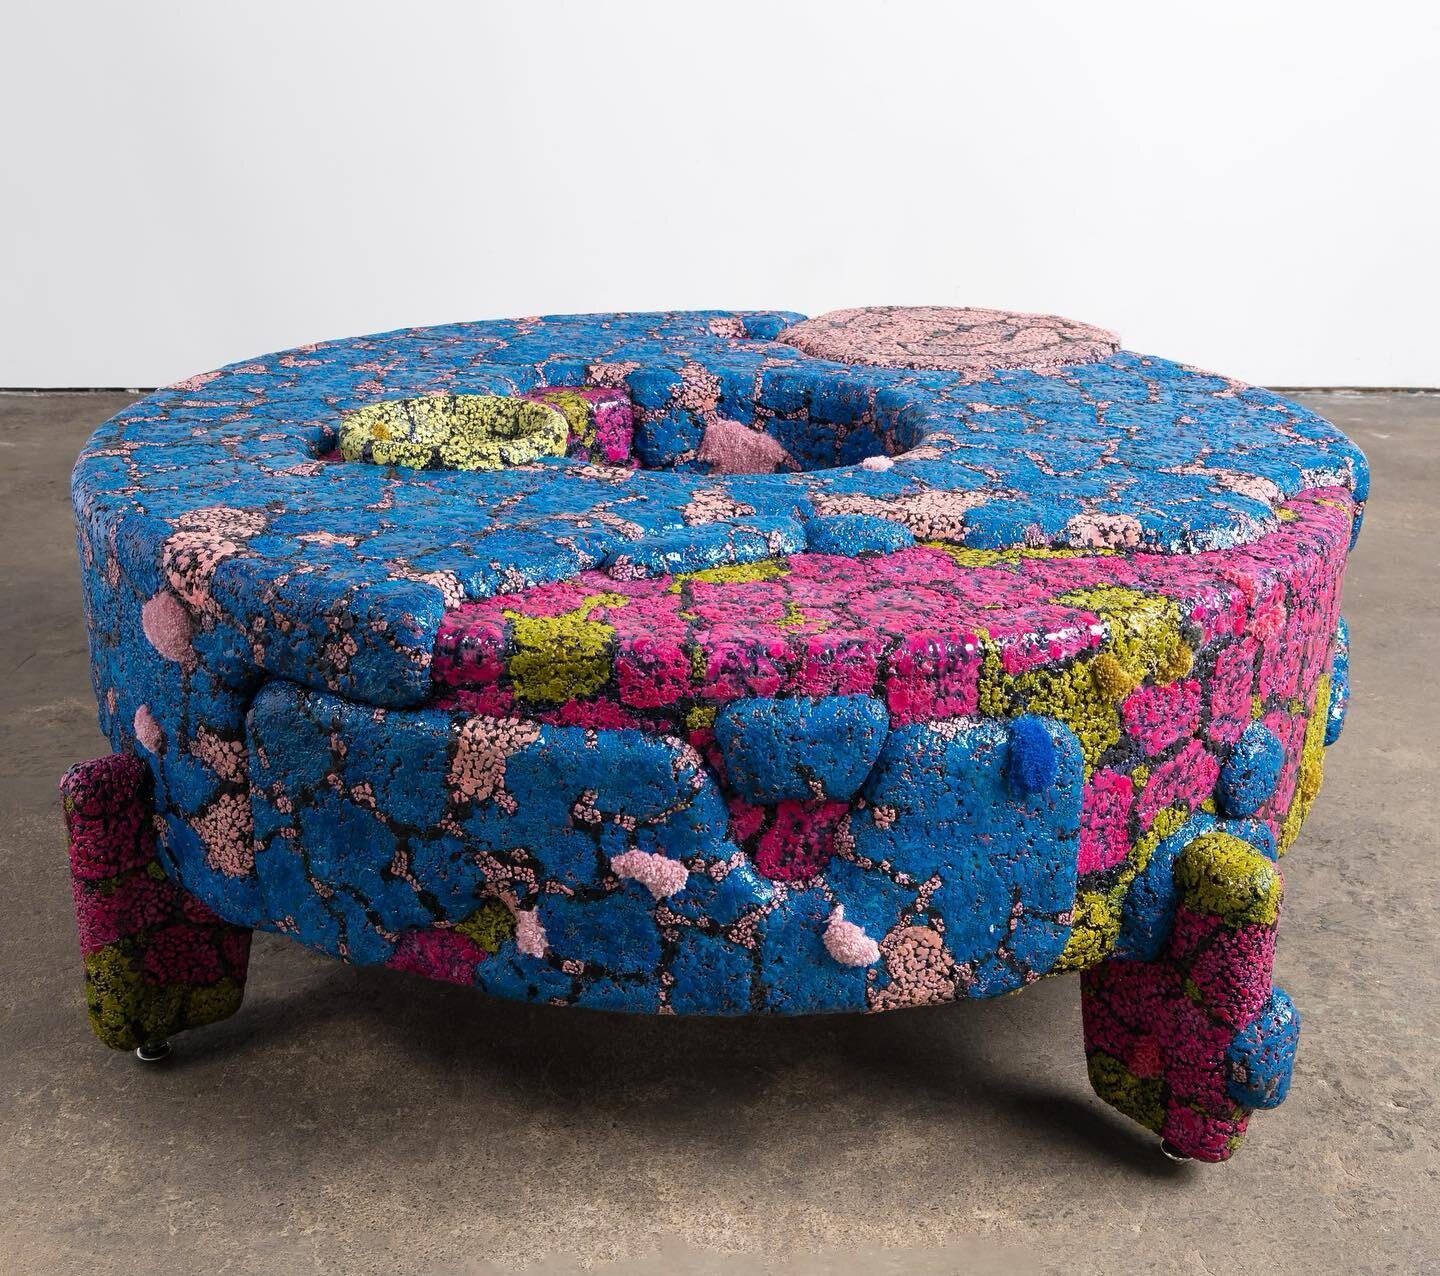 Portal Molded Carpet Table
On view @volume_gallery 

photo cred @tiano_joe